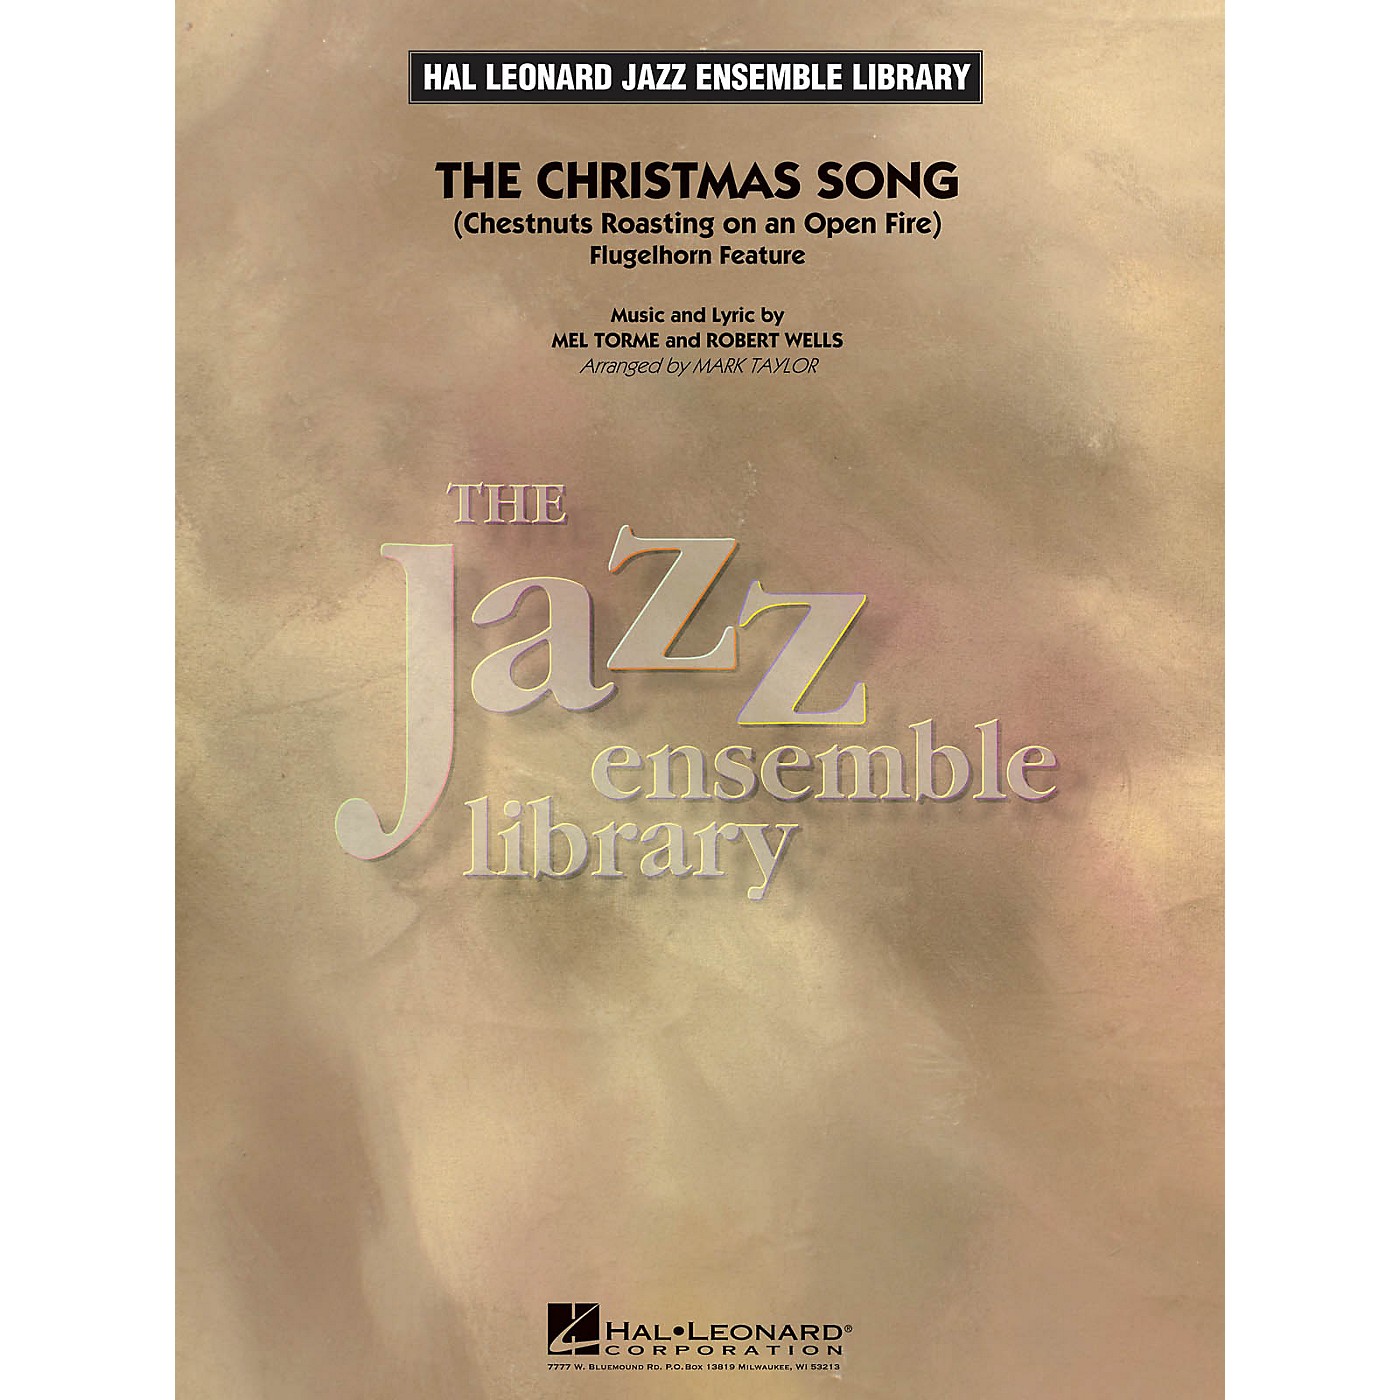 Hal Leonard The Christmas Song (Chestnuts Roasting on an Open Fire) Jazz Band Level 4 Arranged by Mark Taylor thumbnail